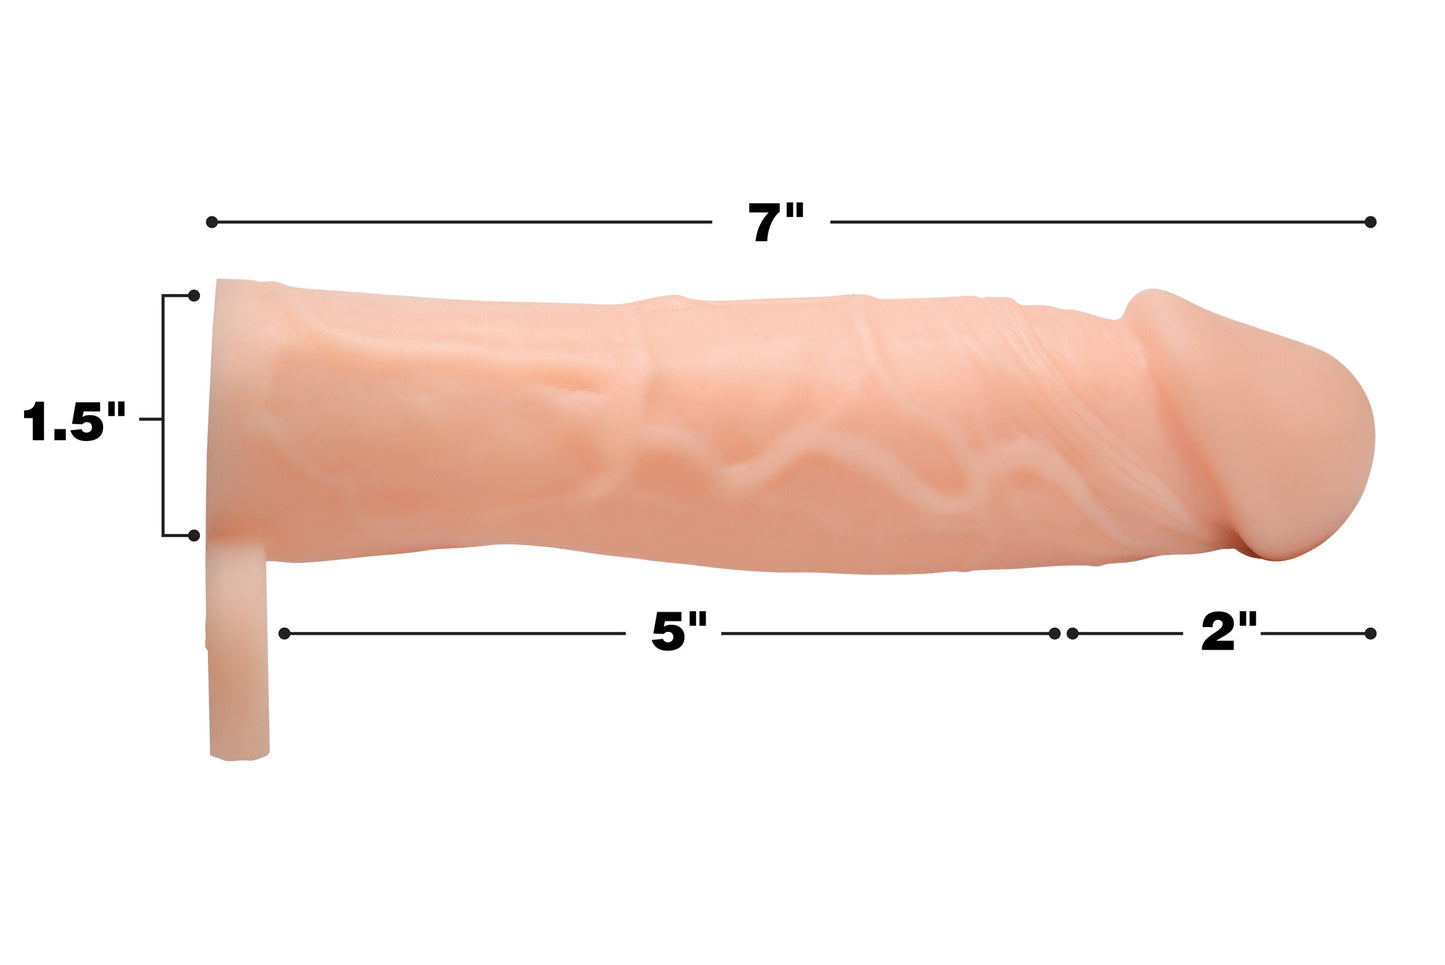 2 Inch Silicone Penis Extension - UABDSM